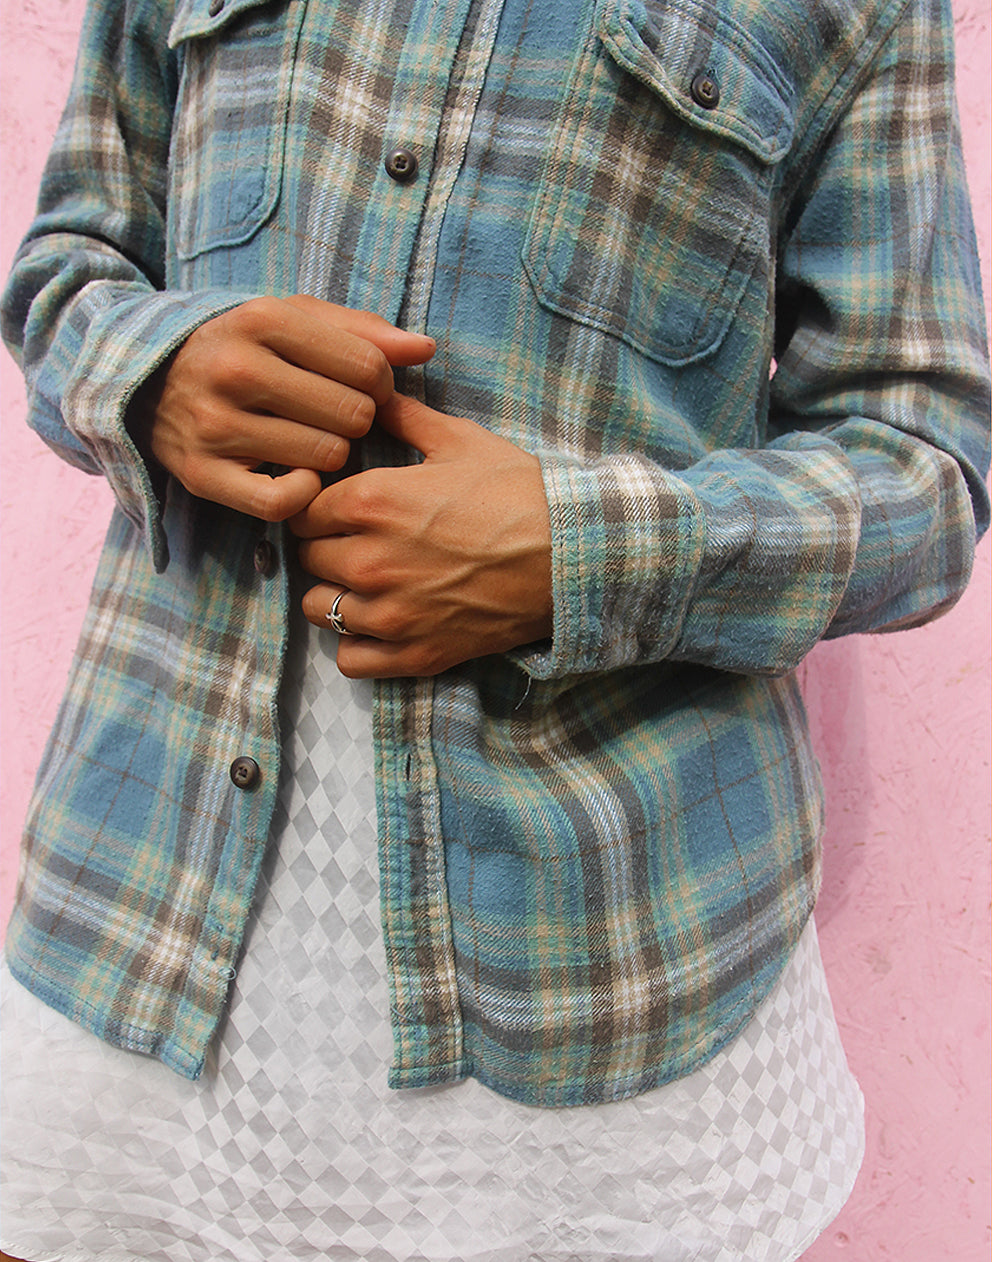 Check Flannel Shirt in Pale Blue